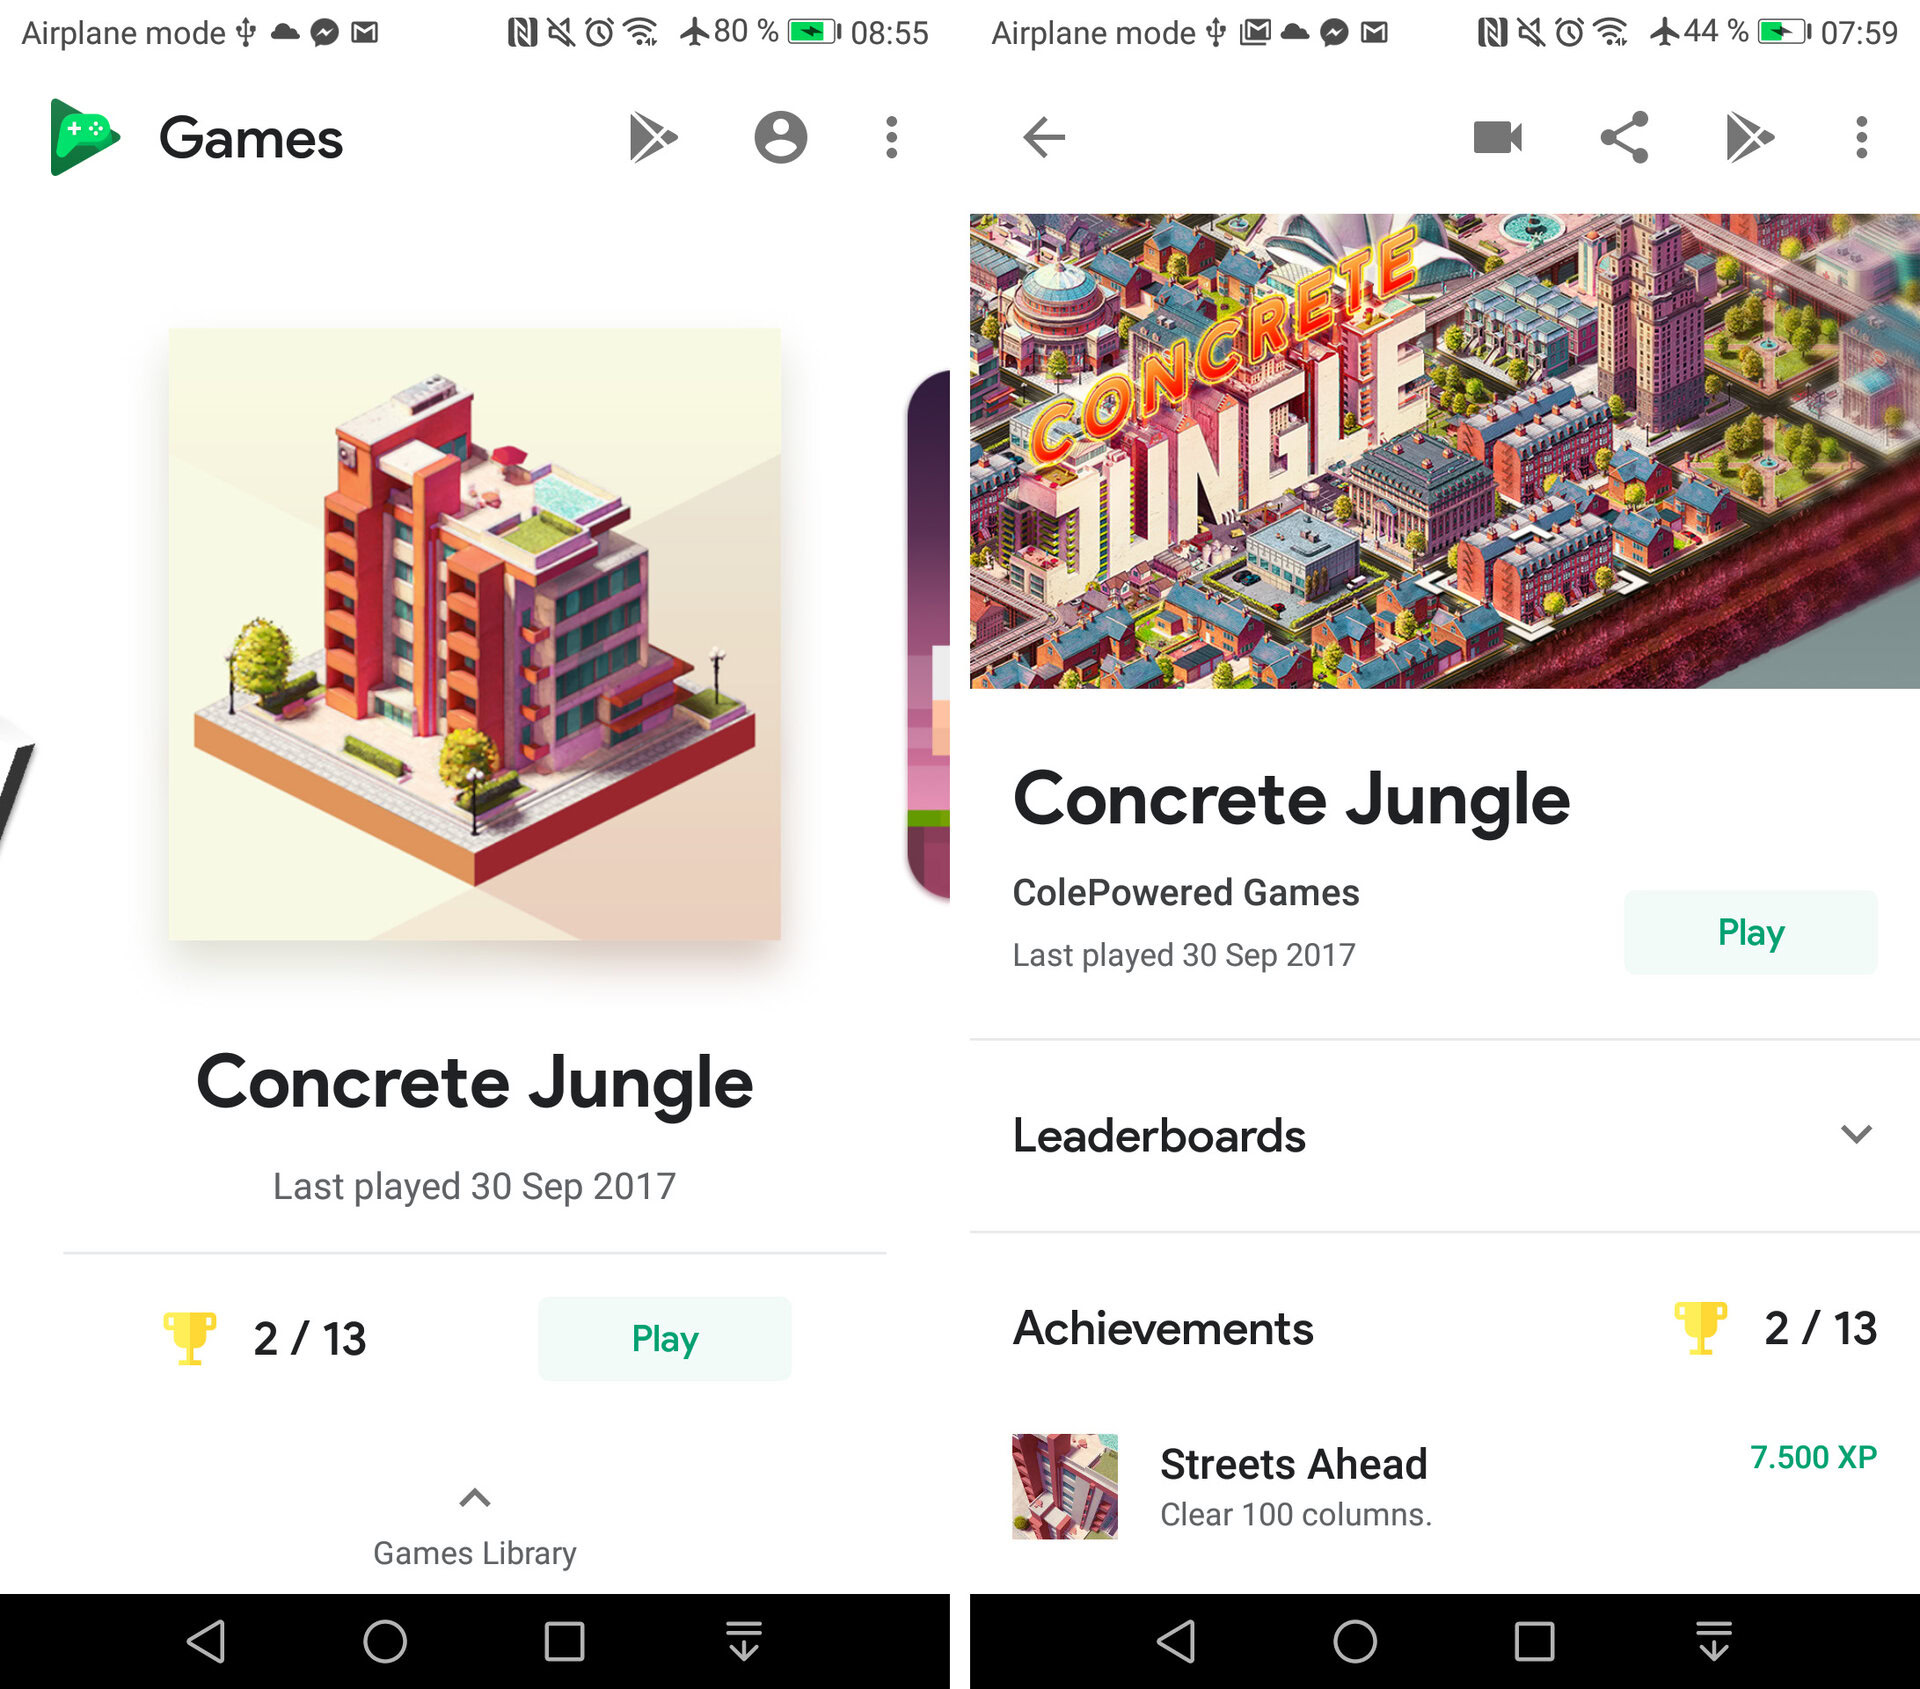 Google Play Games gets new mini-games and redesign in version 5.3